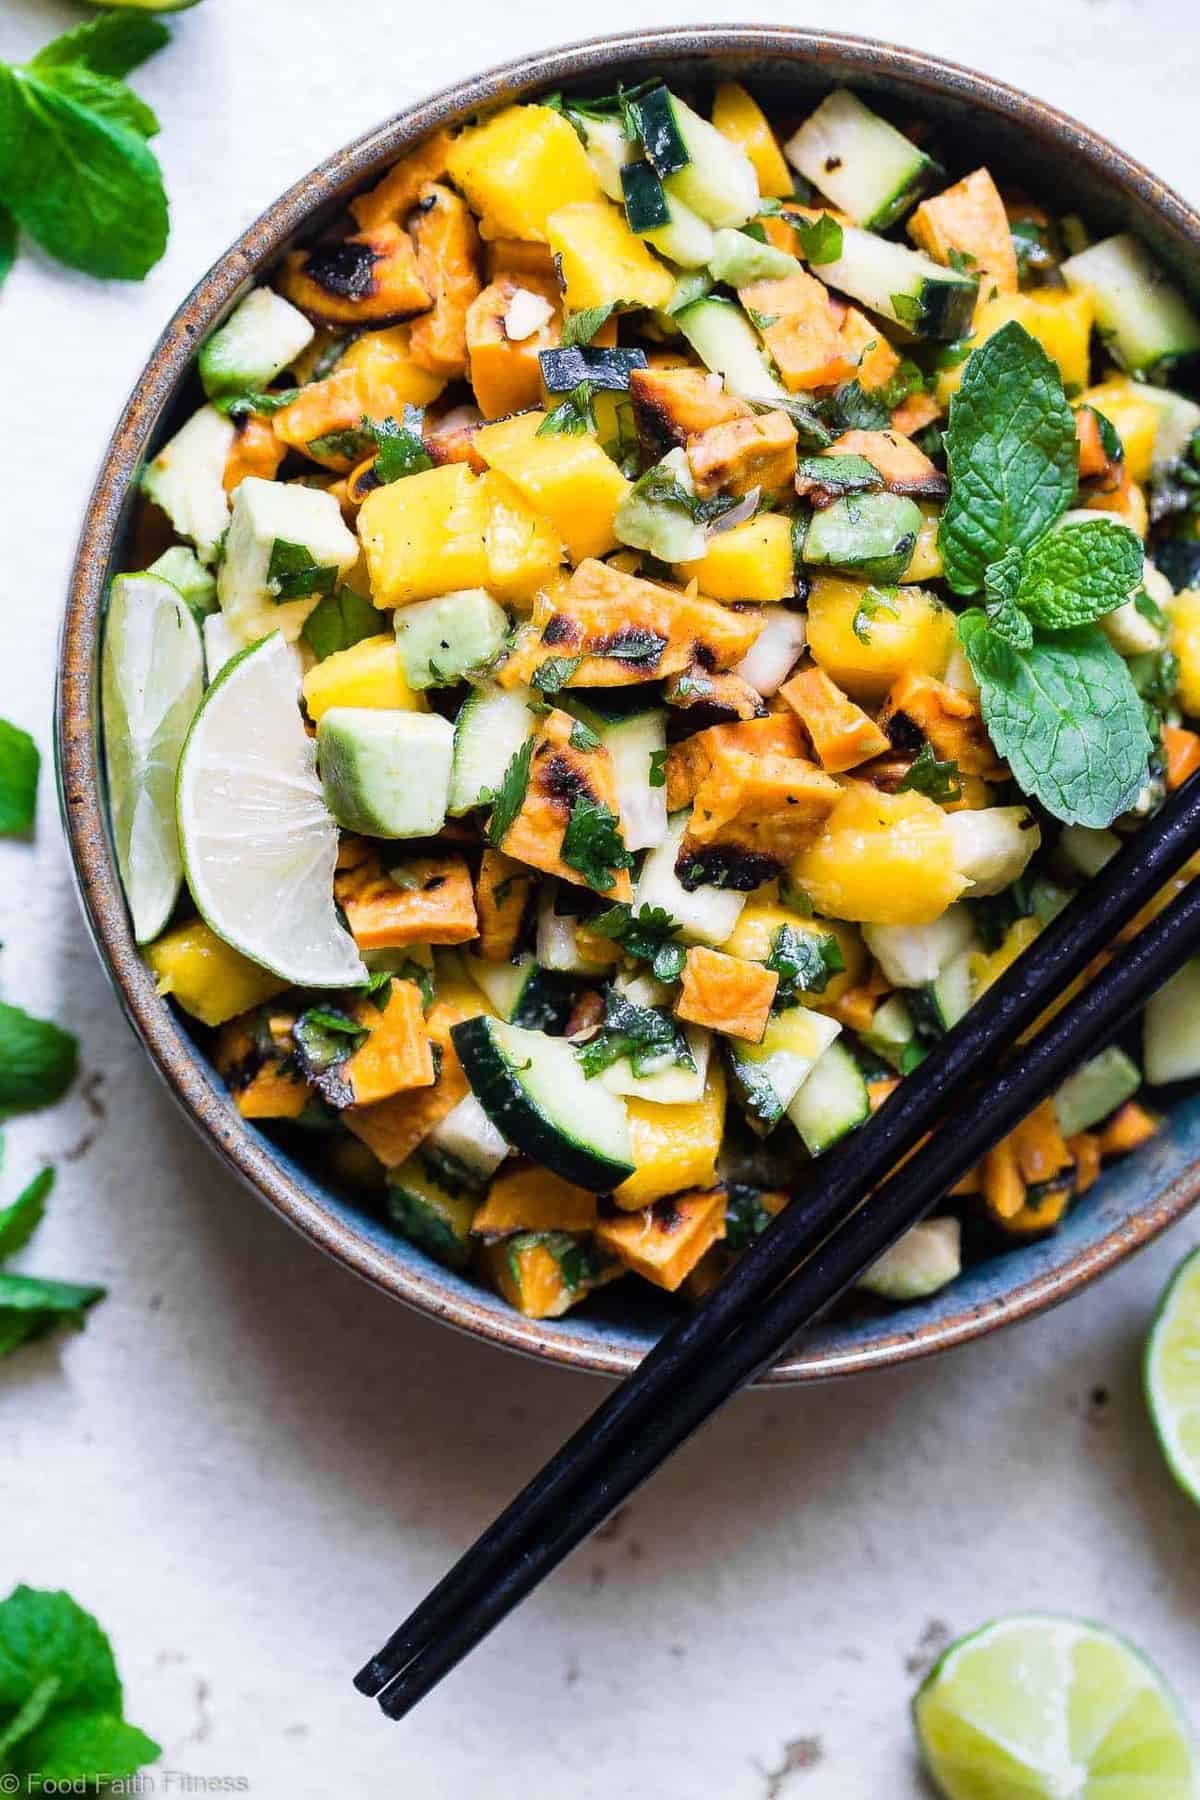 Thai Mango Avocado Salad with Grilled Sweet Potatoes - Loaded with sweet mango, tangy lime juice and creamy avocado, this is an EASY, healthy summer side that is sure to please! Gluten free, vegan, paleo and whole30 friendly too! | #Foodfaithfitness | #Whole30 #Glutenfree #Vegan #Paleo #Dairyfree